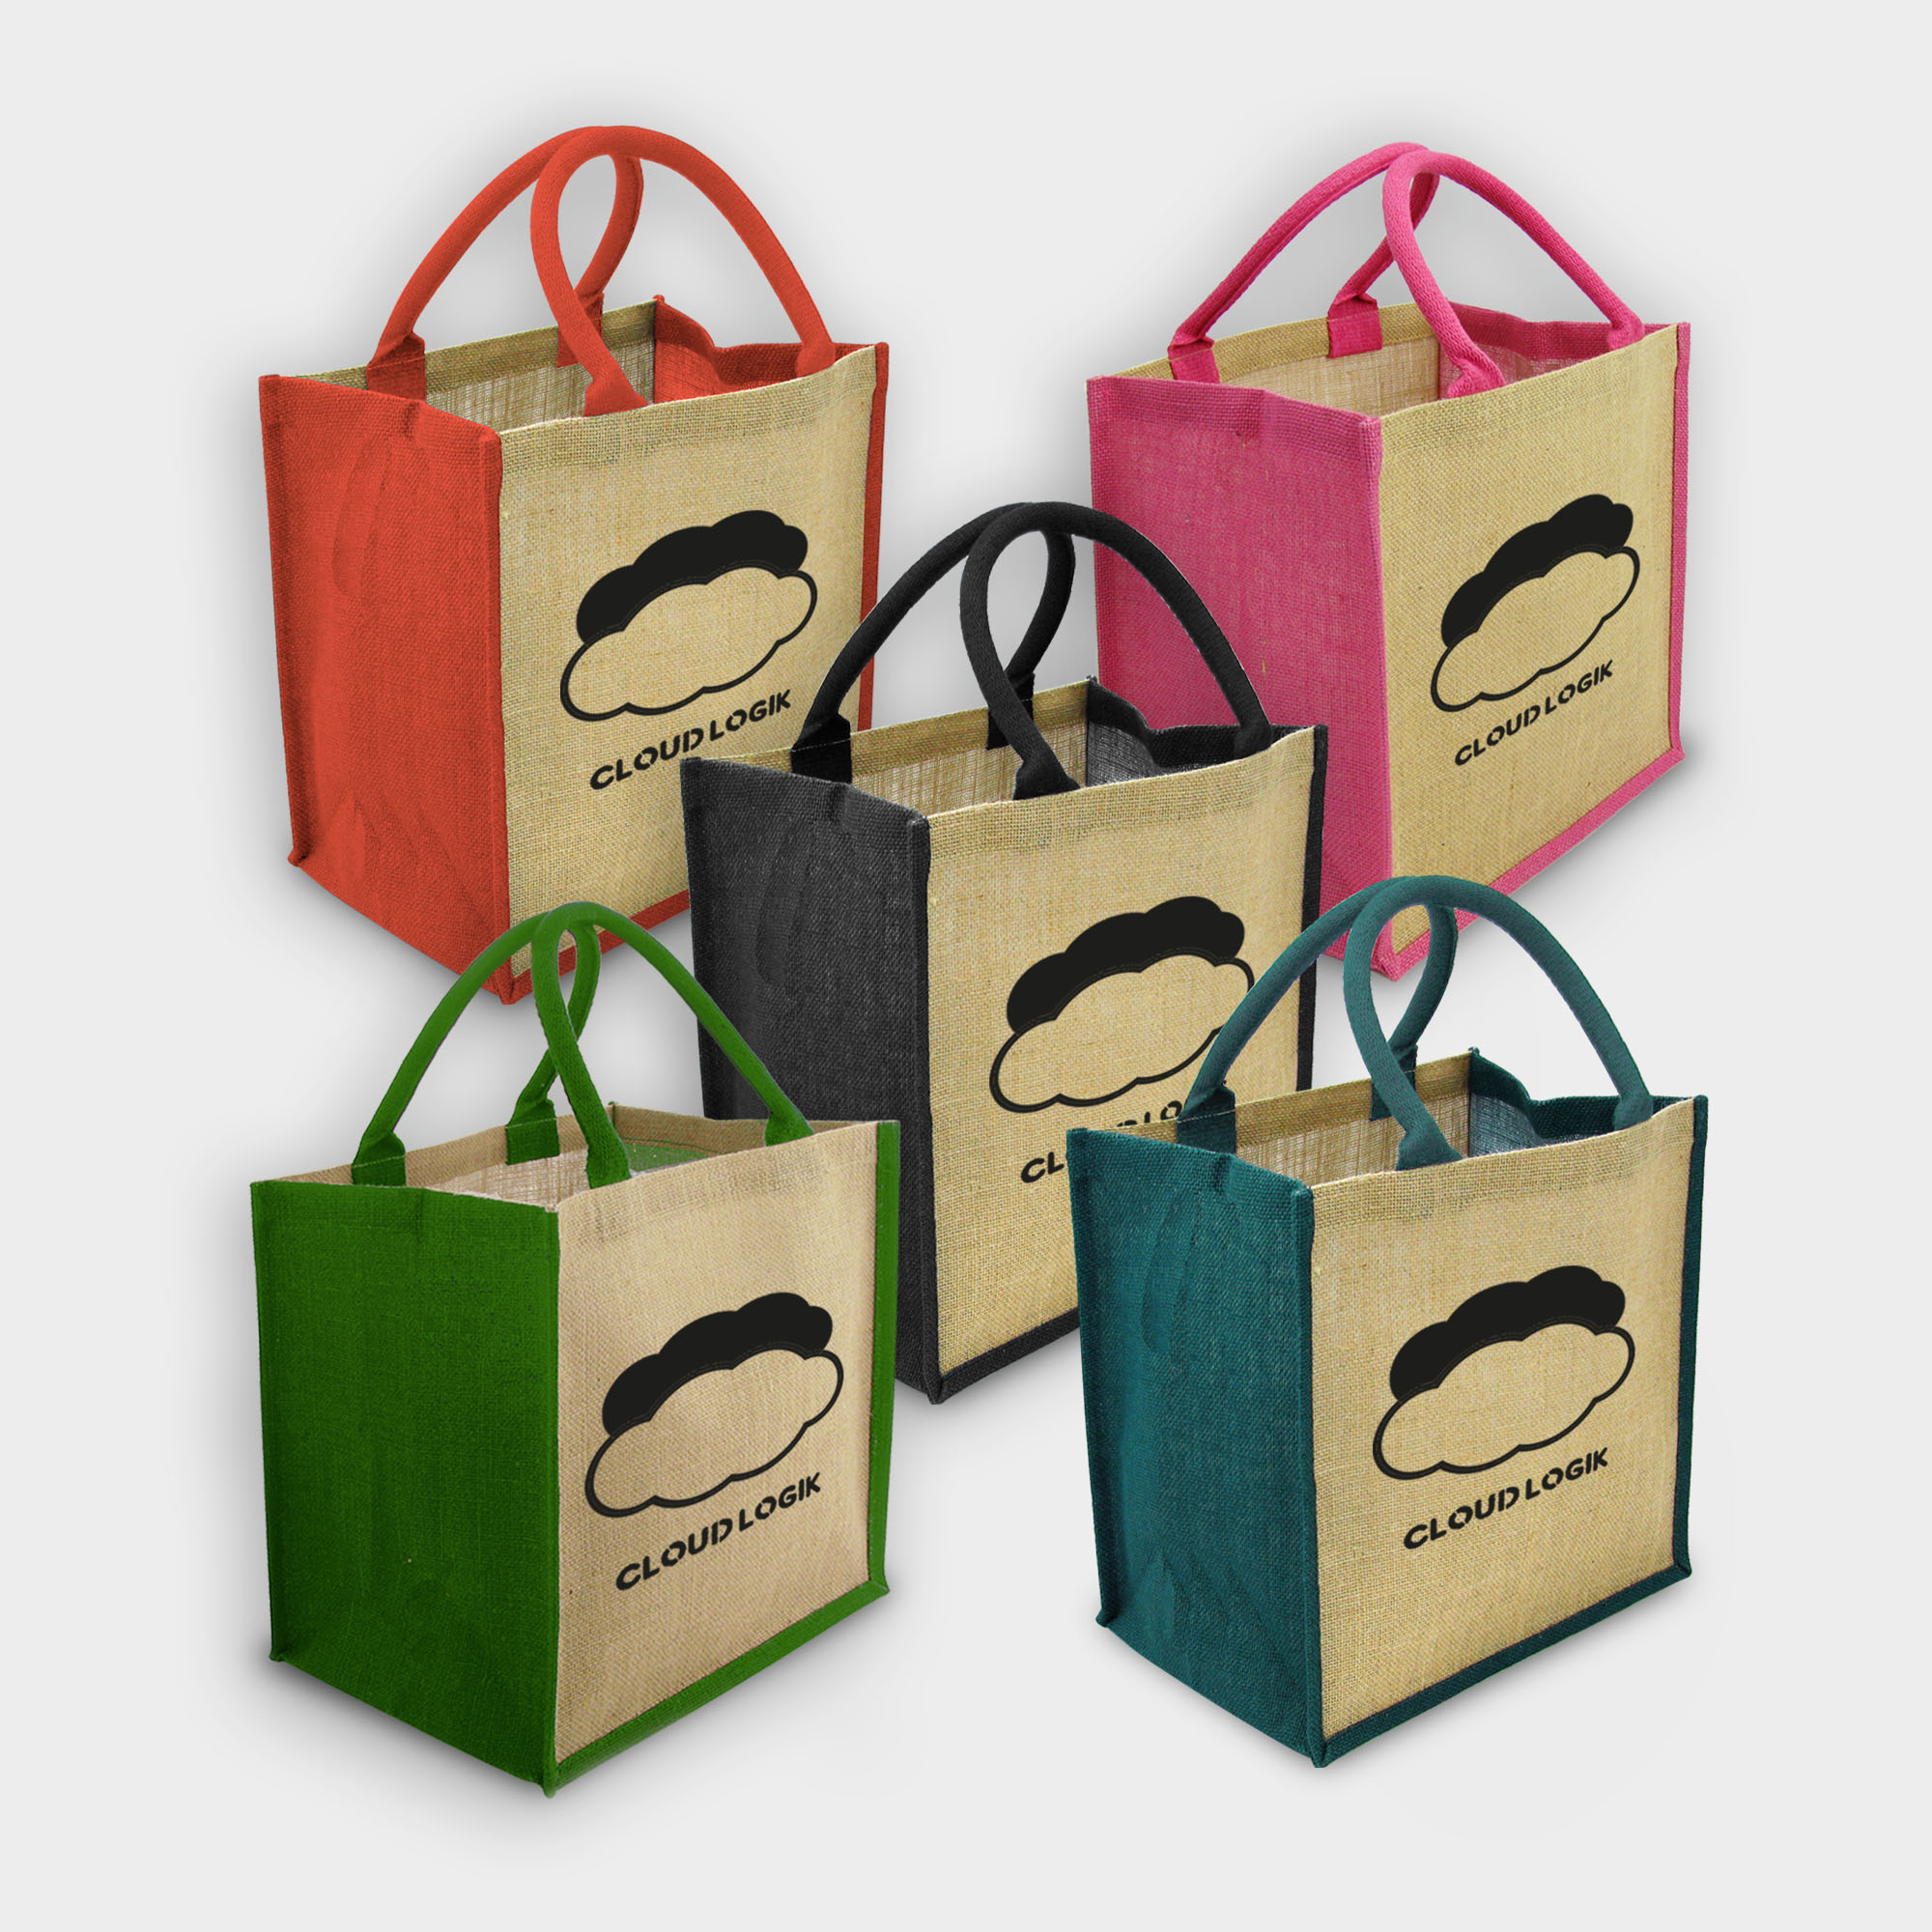 The Green & Good Brighton Jute Bag is made from natural and sustainable jute. Comes with coloured gussets in various colours. Popular shopping and gift bag with square format and cotton webbing over rope handles. Lined inside with a laminated surface for easy cleaning and sturdiness.